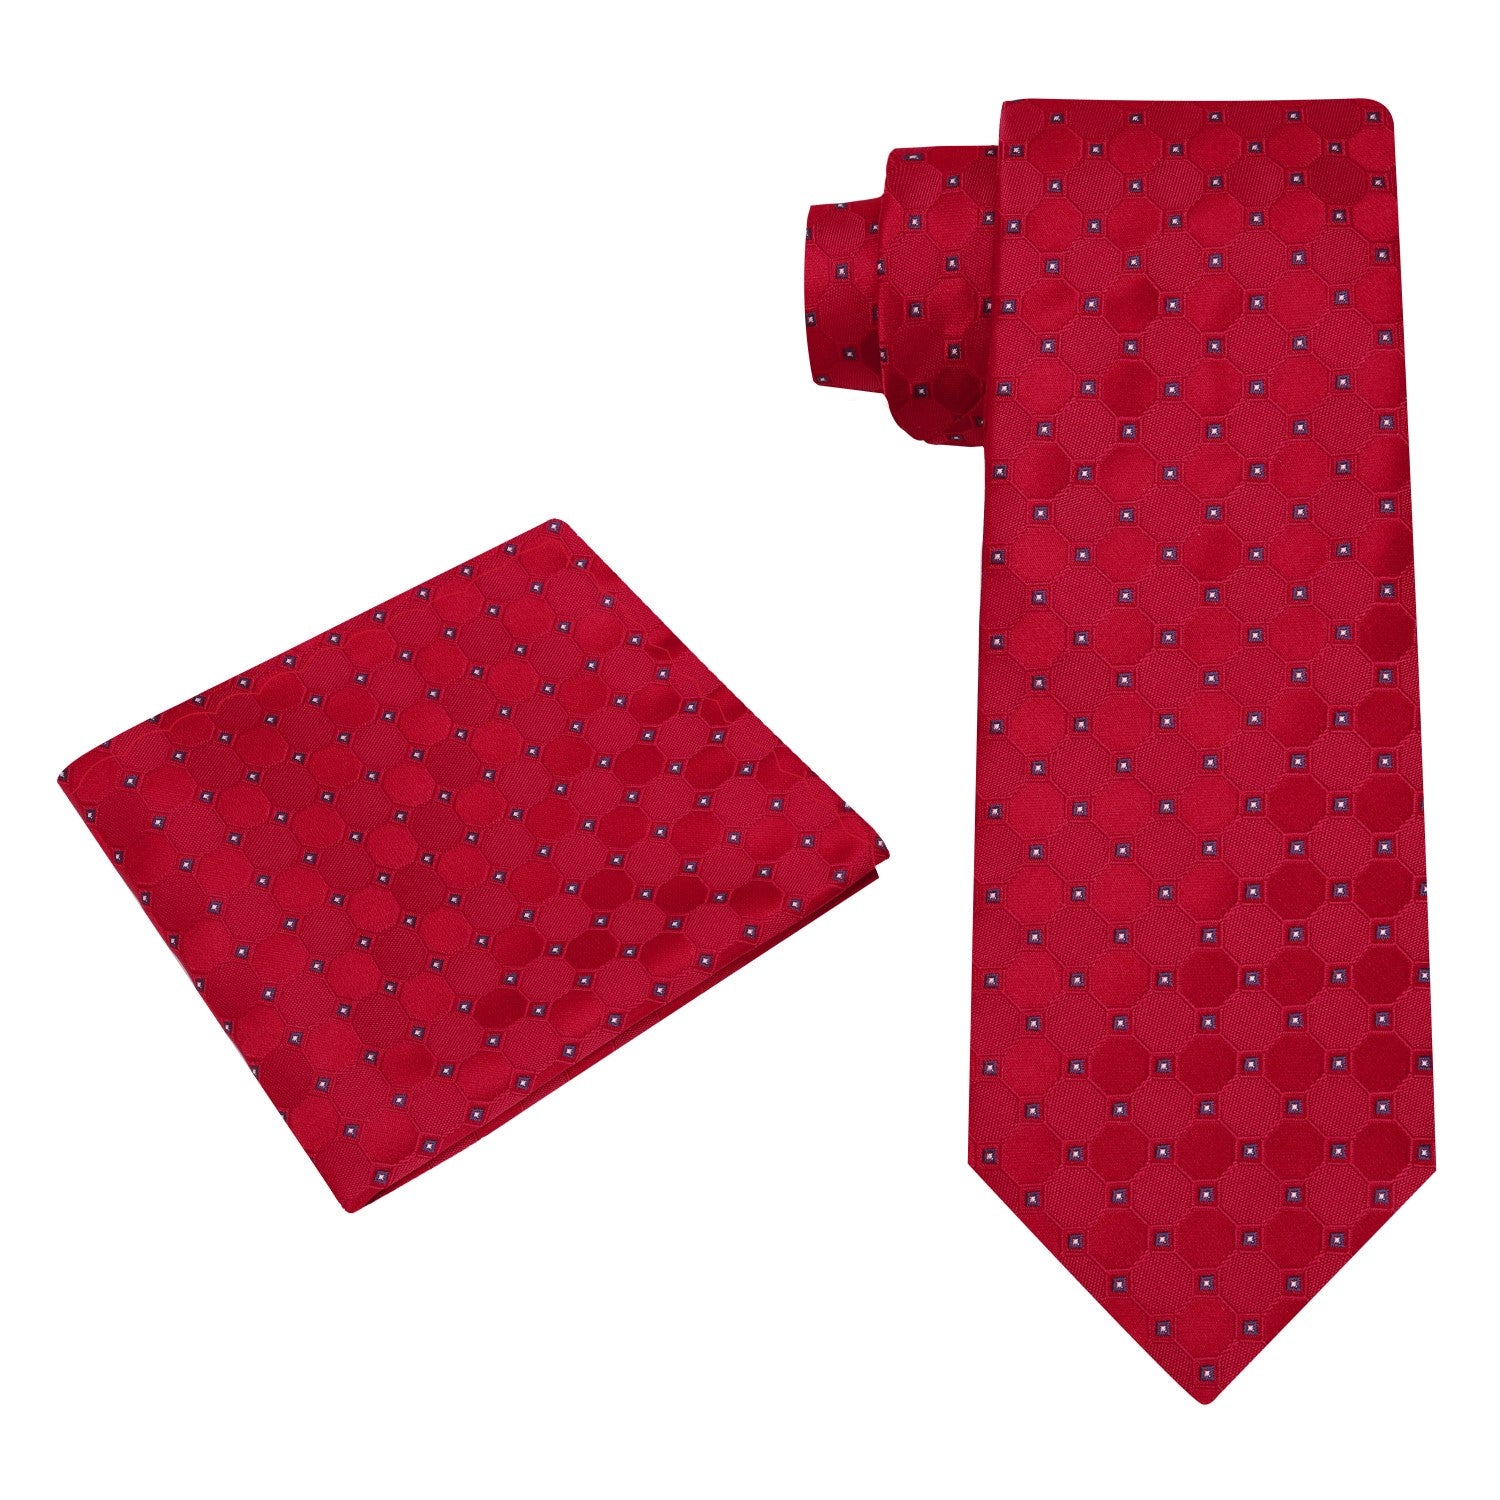 Alt View: Red, Black Geometric Tie and Pocket Square